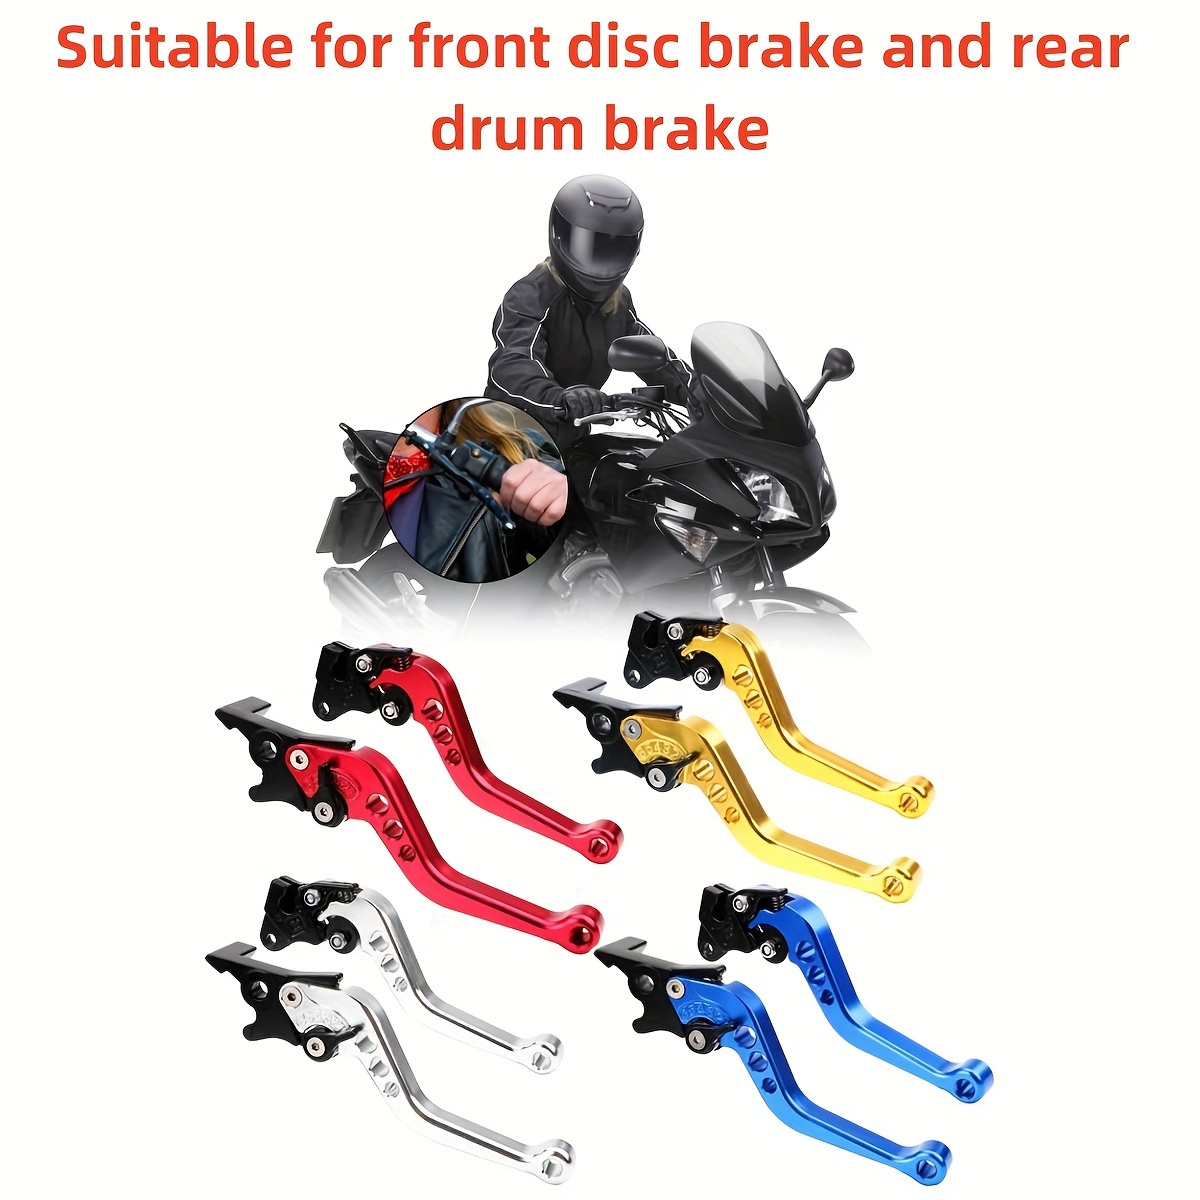 

Universal Motorcycle Clutch Brake Handle Drum Lever Fit For Bmw For For Motorbike Accessories Modification Alloy Cnc